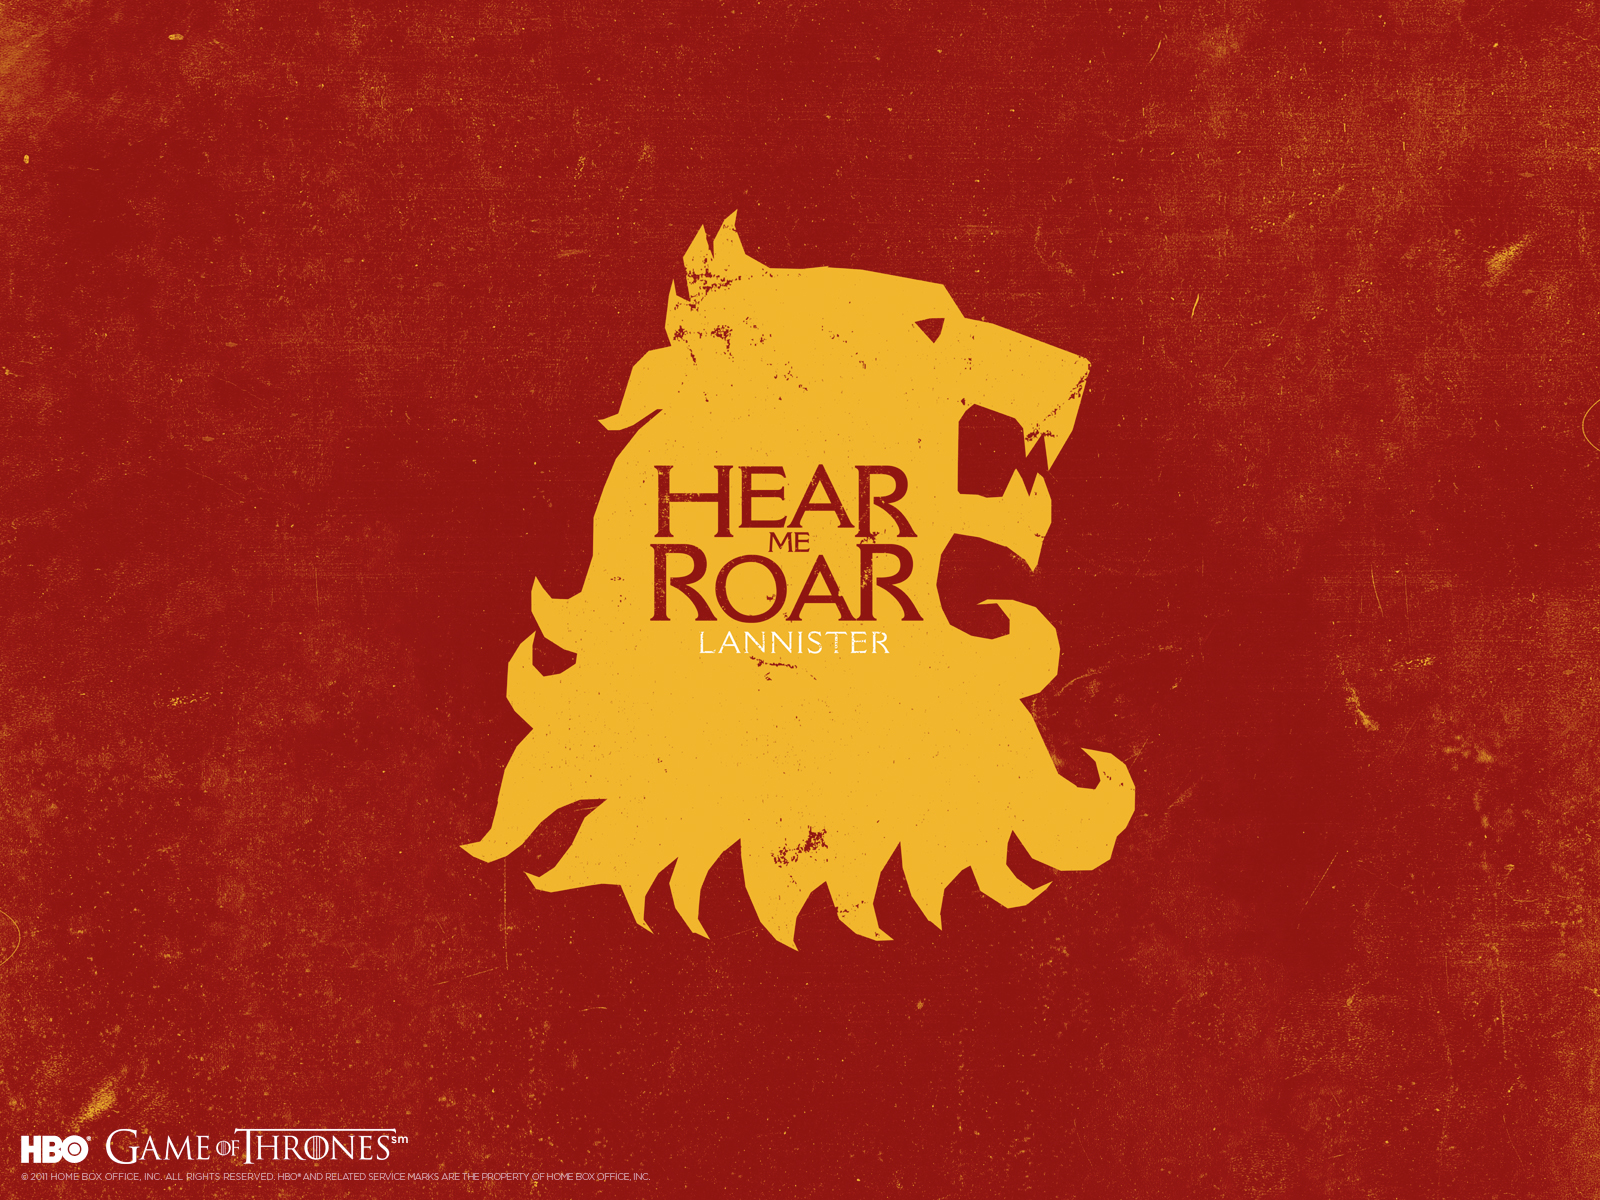 Game of Thrones Sigil Wallpapers Making Game of Thrones